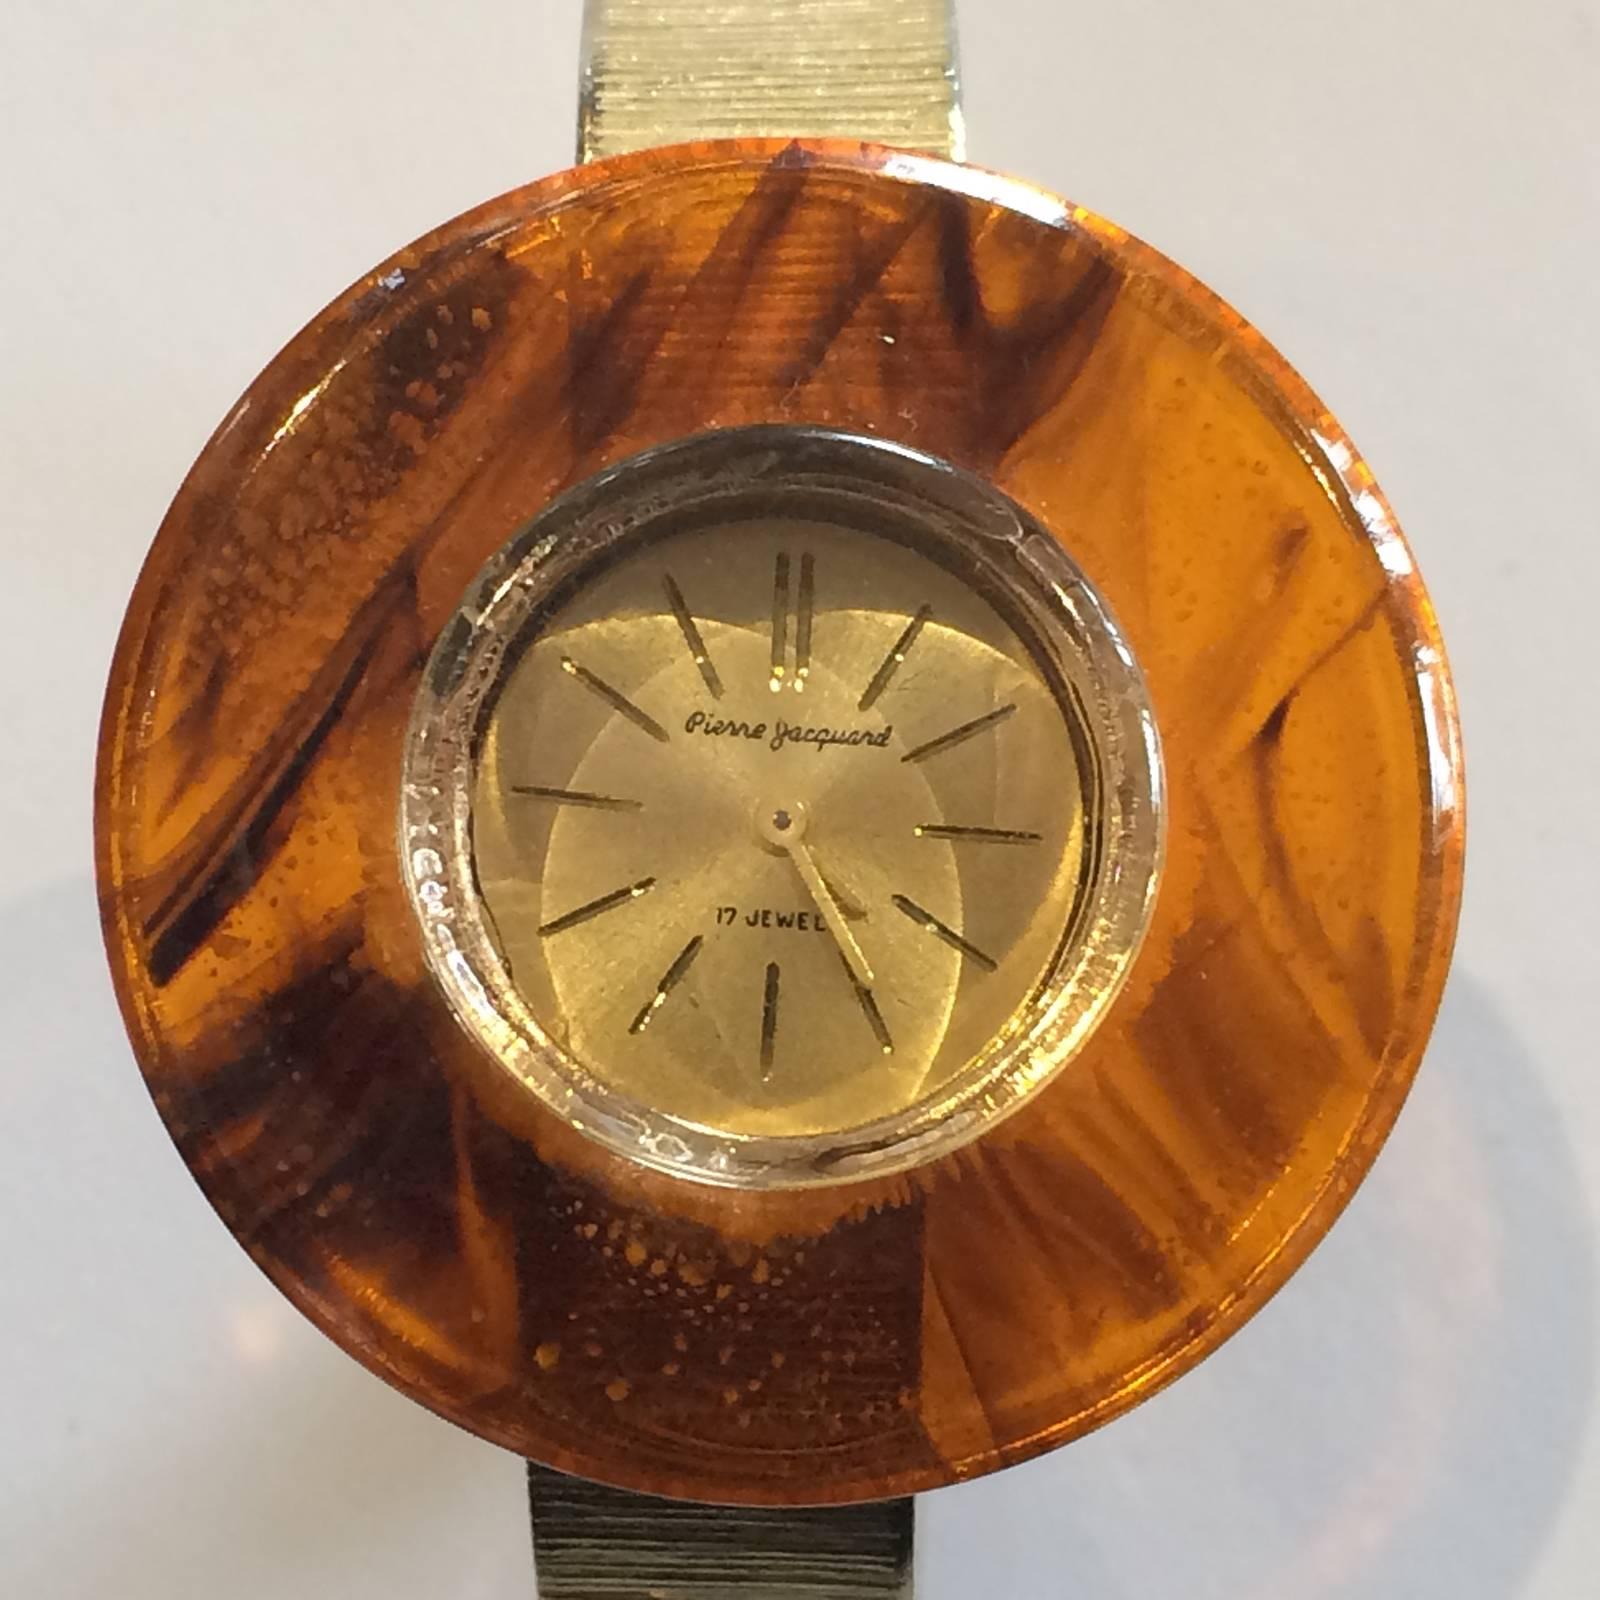 Mid Century, Honey Swirl Bakelite and Gilt Clamper Wrist Watch. All in excellent condition, with a fine, stippled surface to the Bakelite, keeping good time for age, checked, cleaned and timed. Slight age patina to rear of watch, but face is